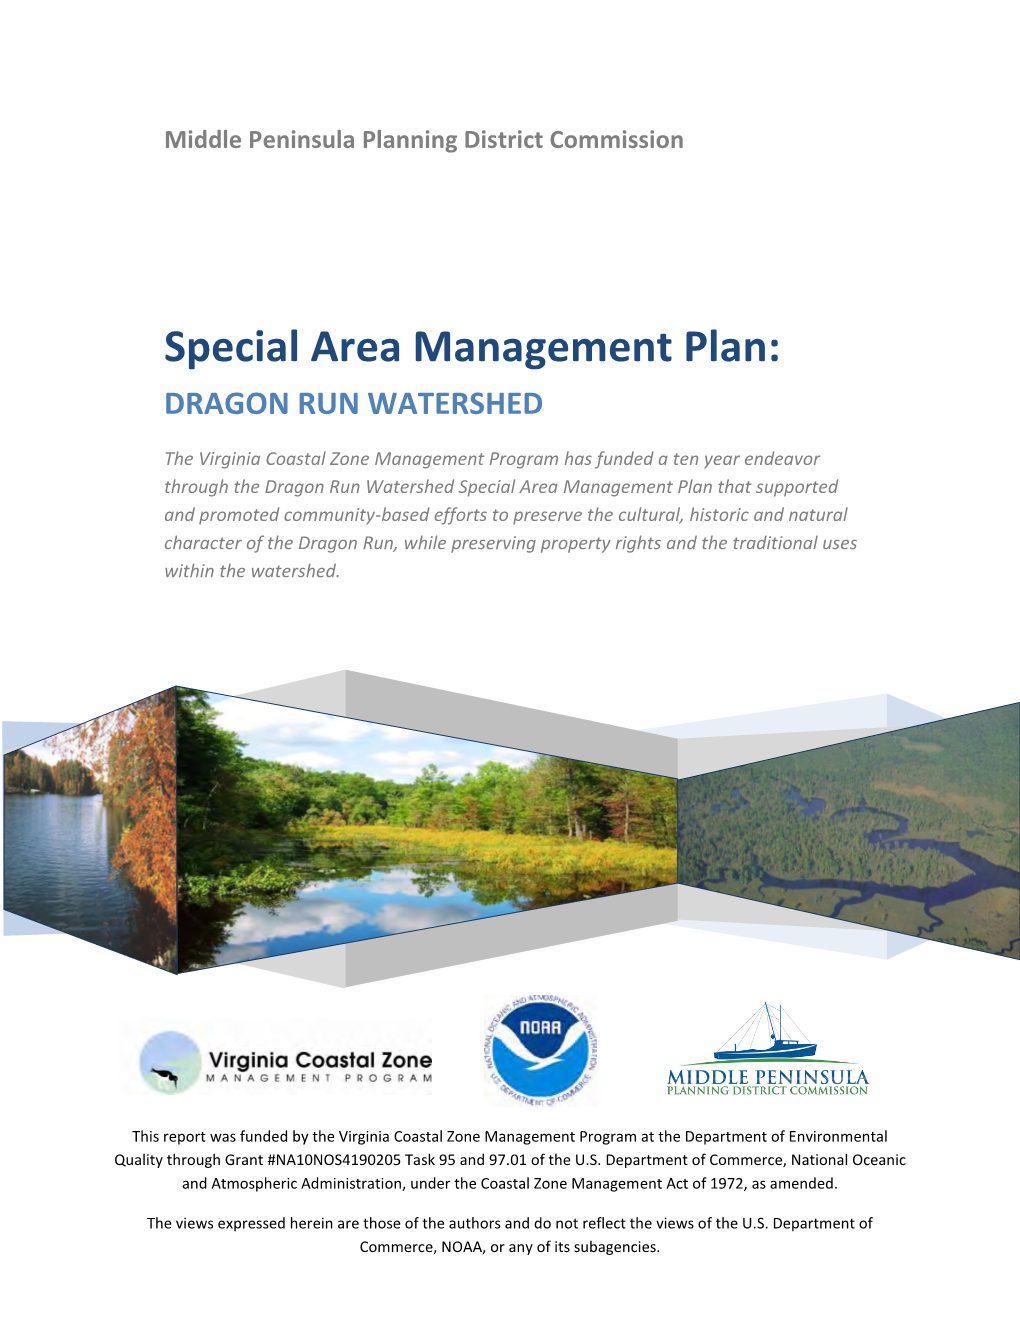 Special Area Management Plan: DRAGON RUN WATERSHED